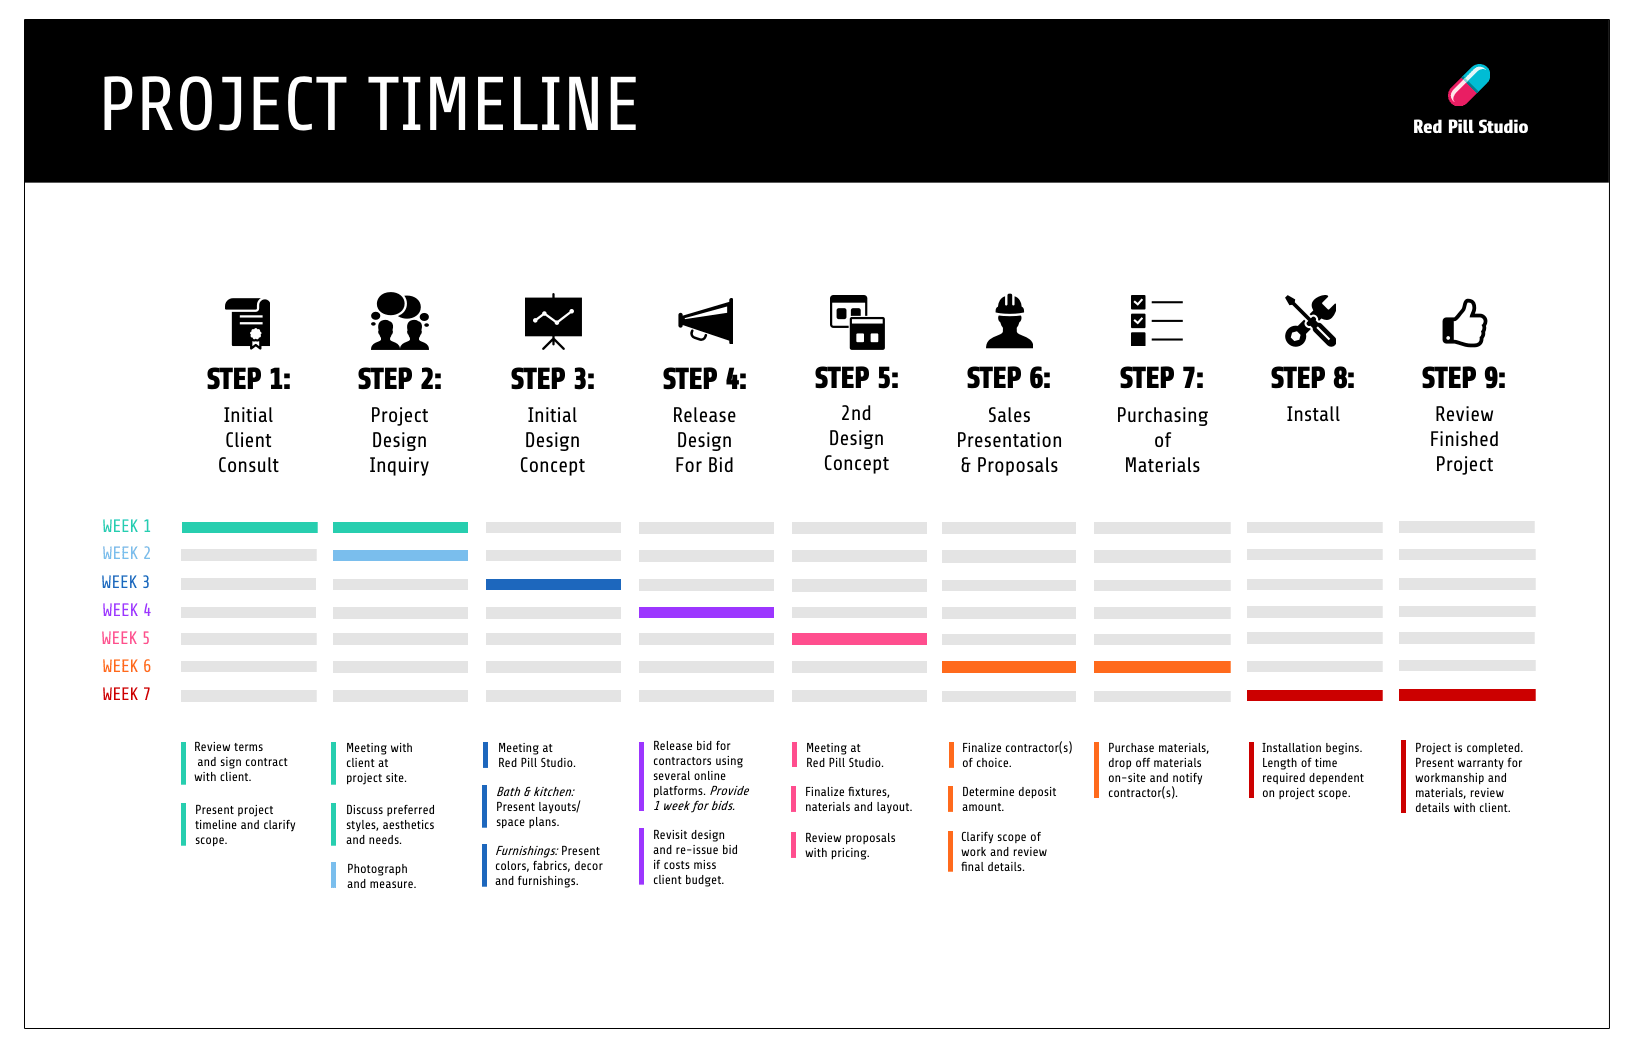 Project Plan Timeline Infographic